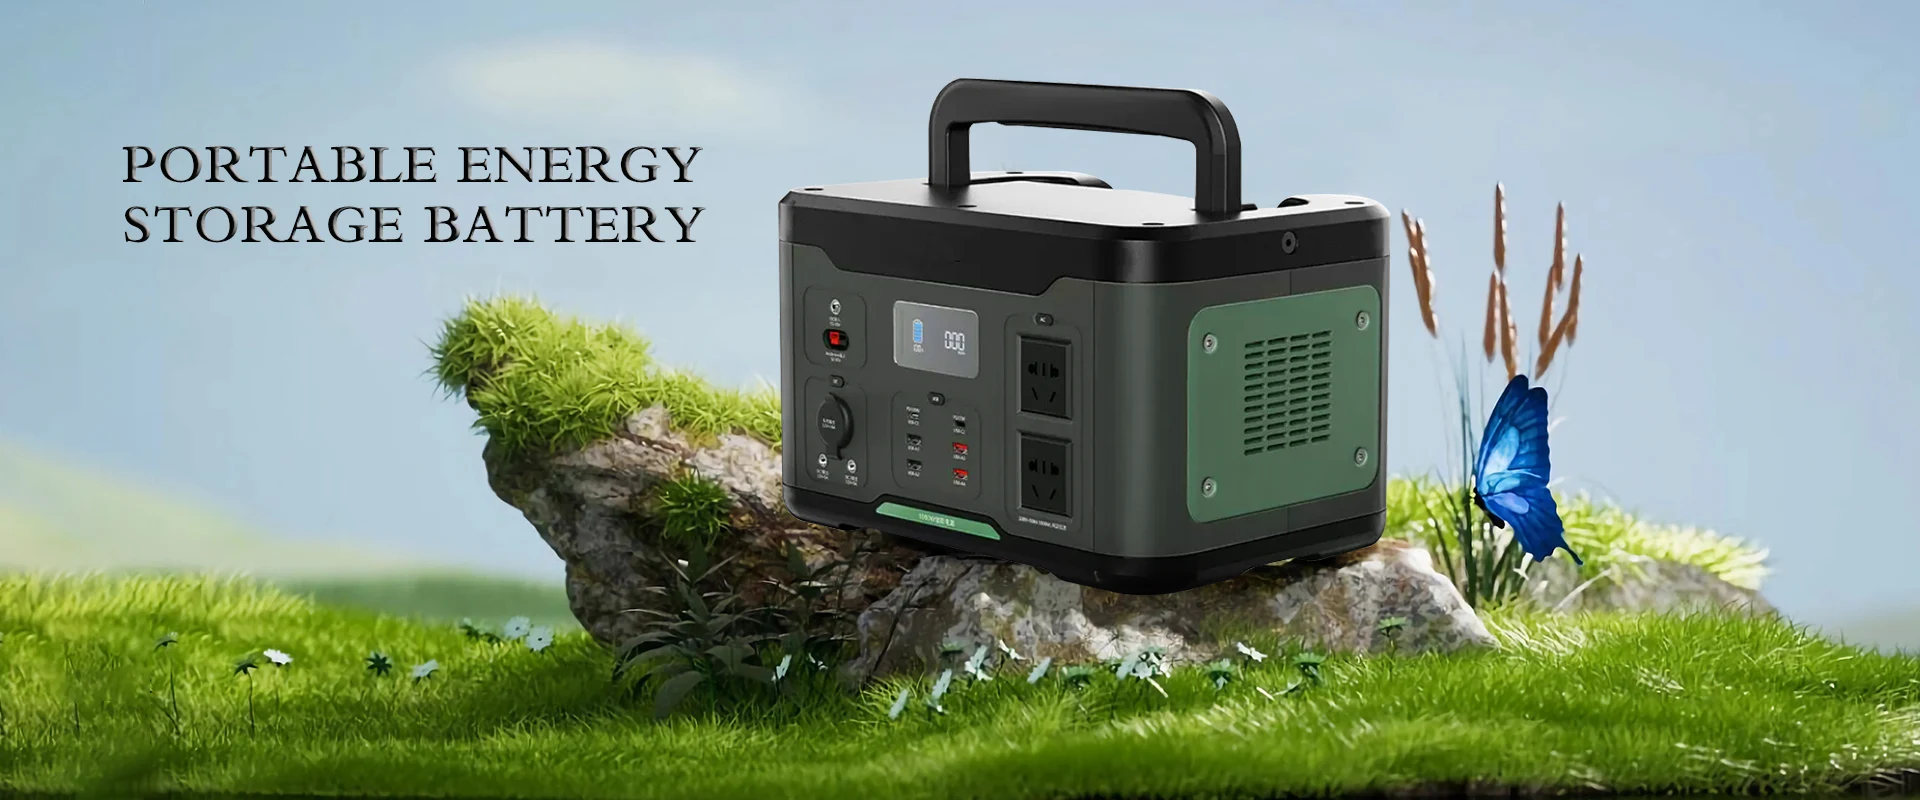 Portable Energy Storage Battery Manufacturers